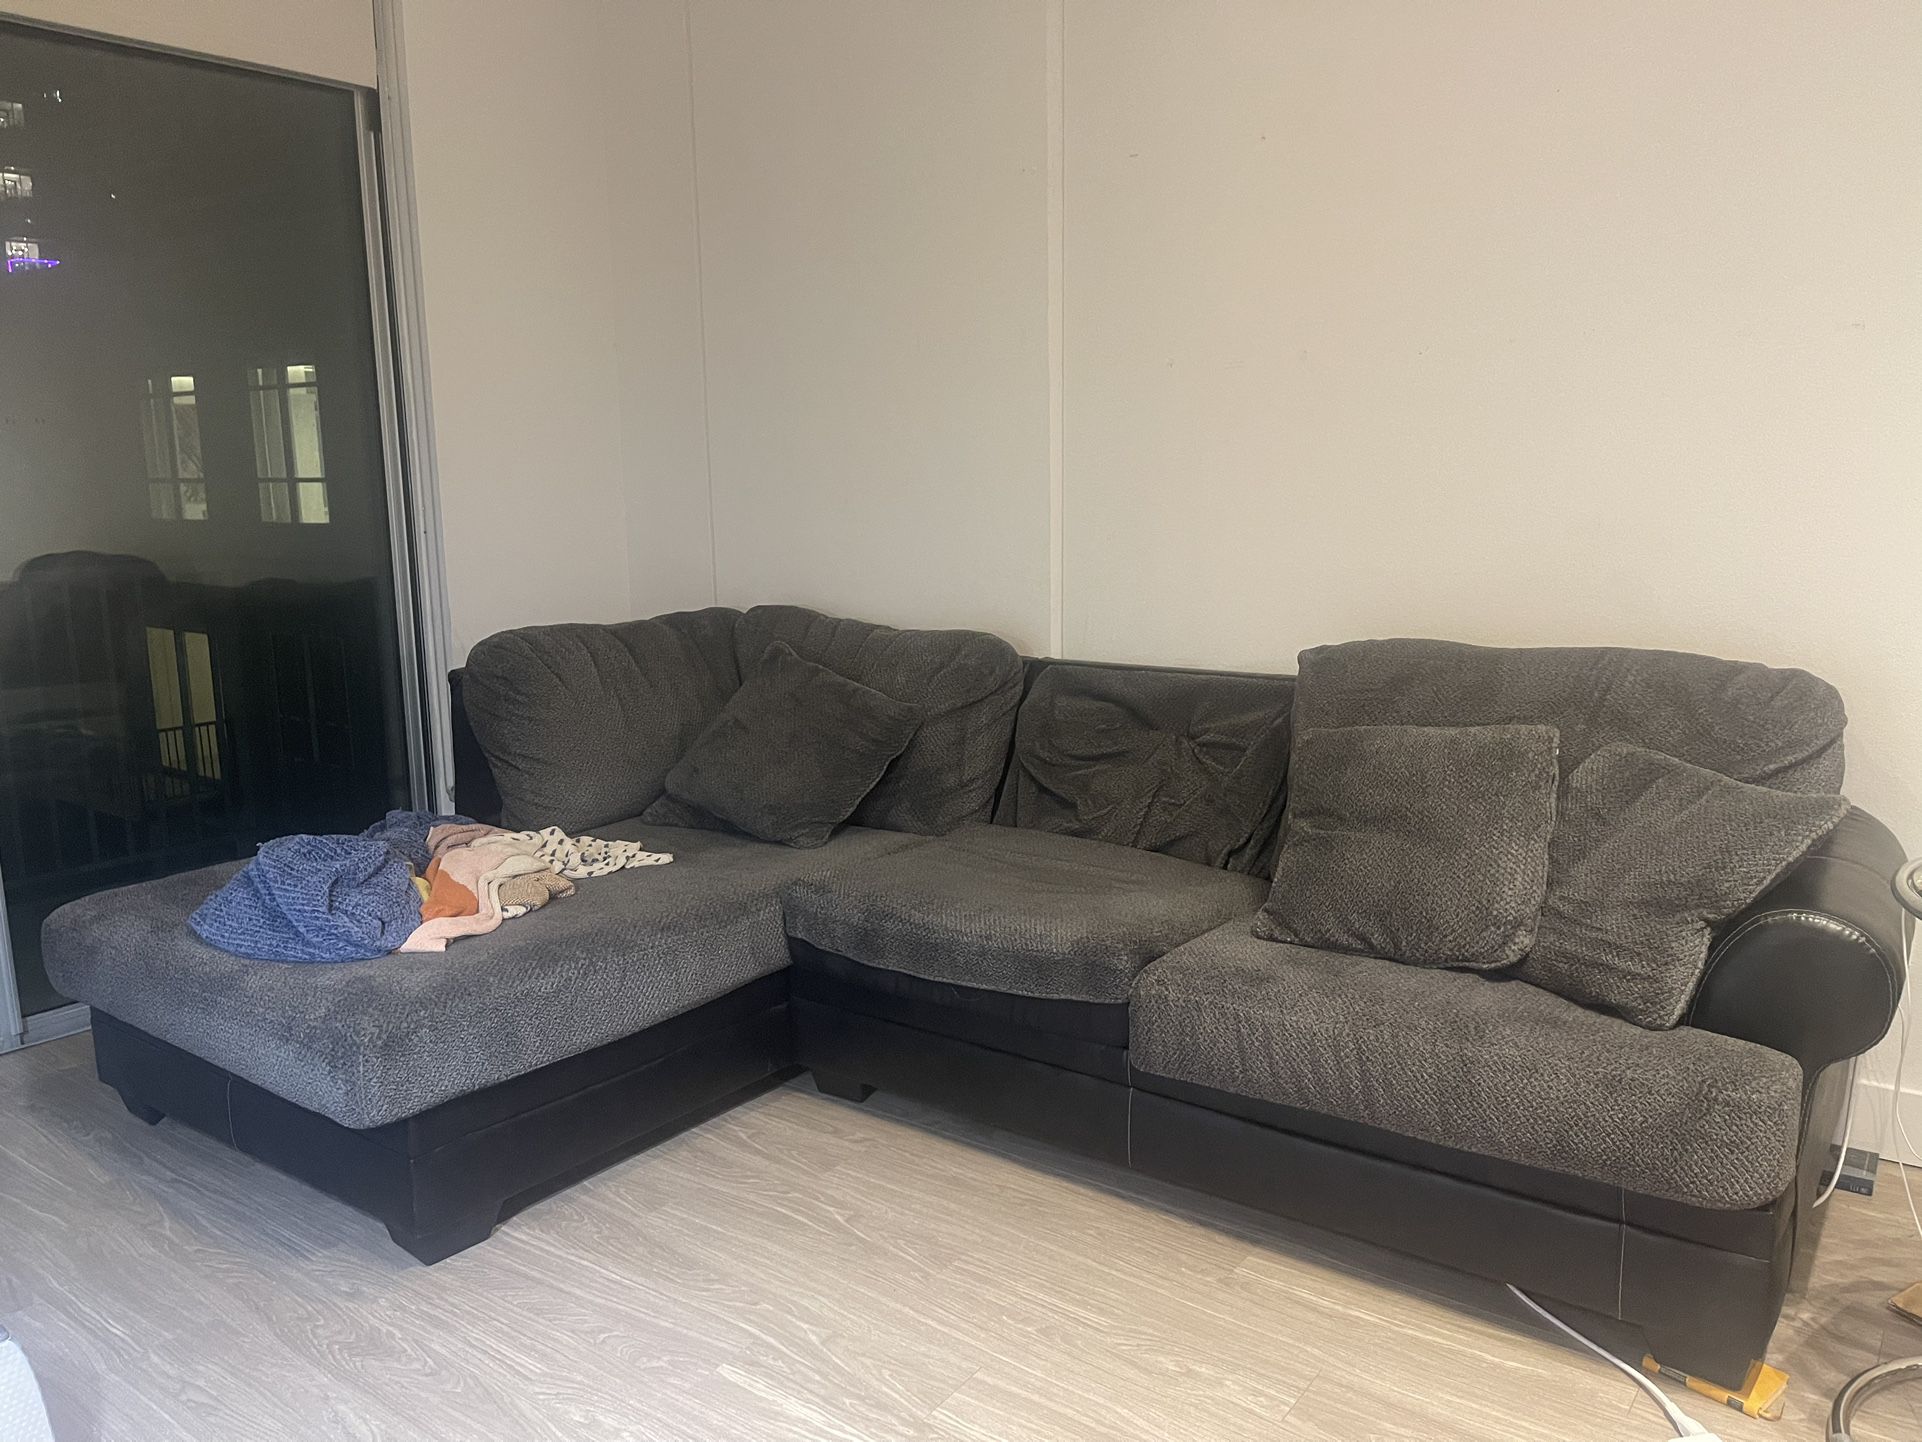 COMFY Grey Sectional Couch